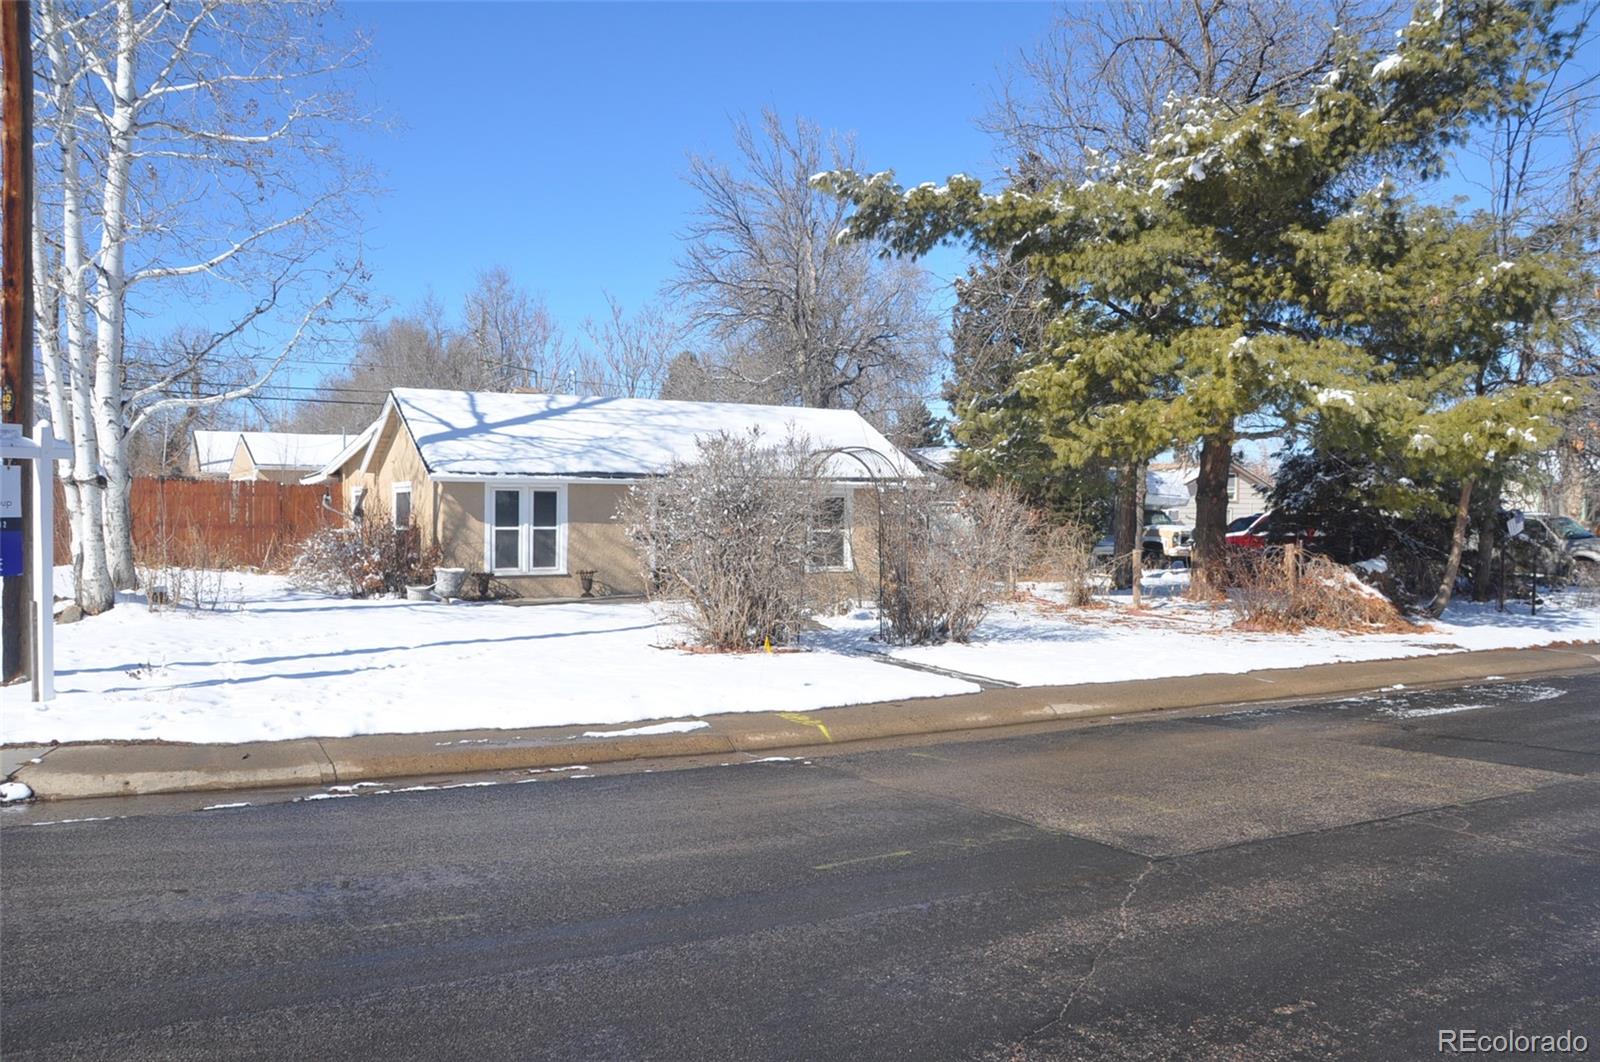 4795 s galapago street, englewood sold home. Closed on 2024-03-19 for $420,000.